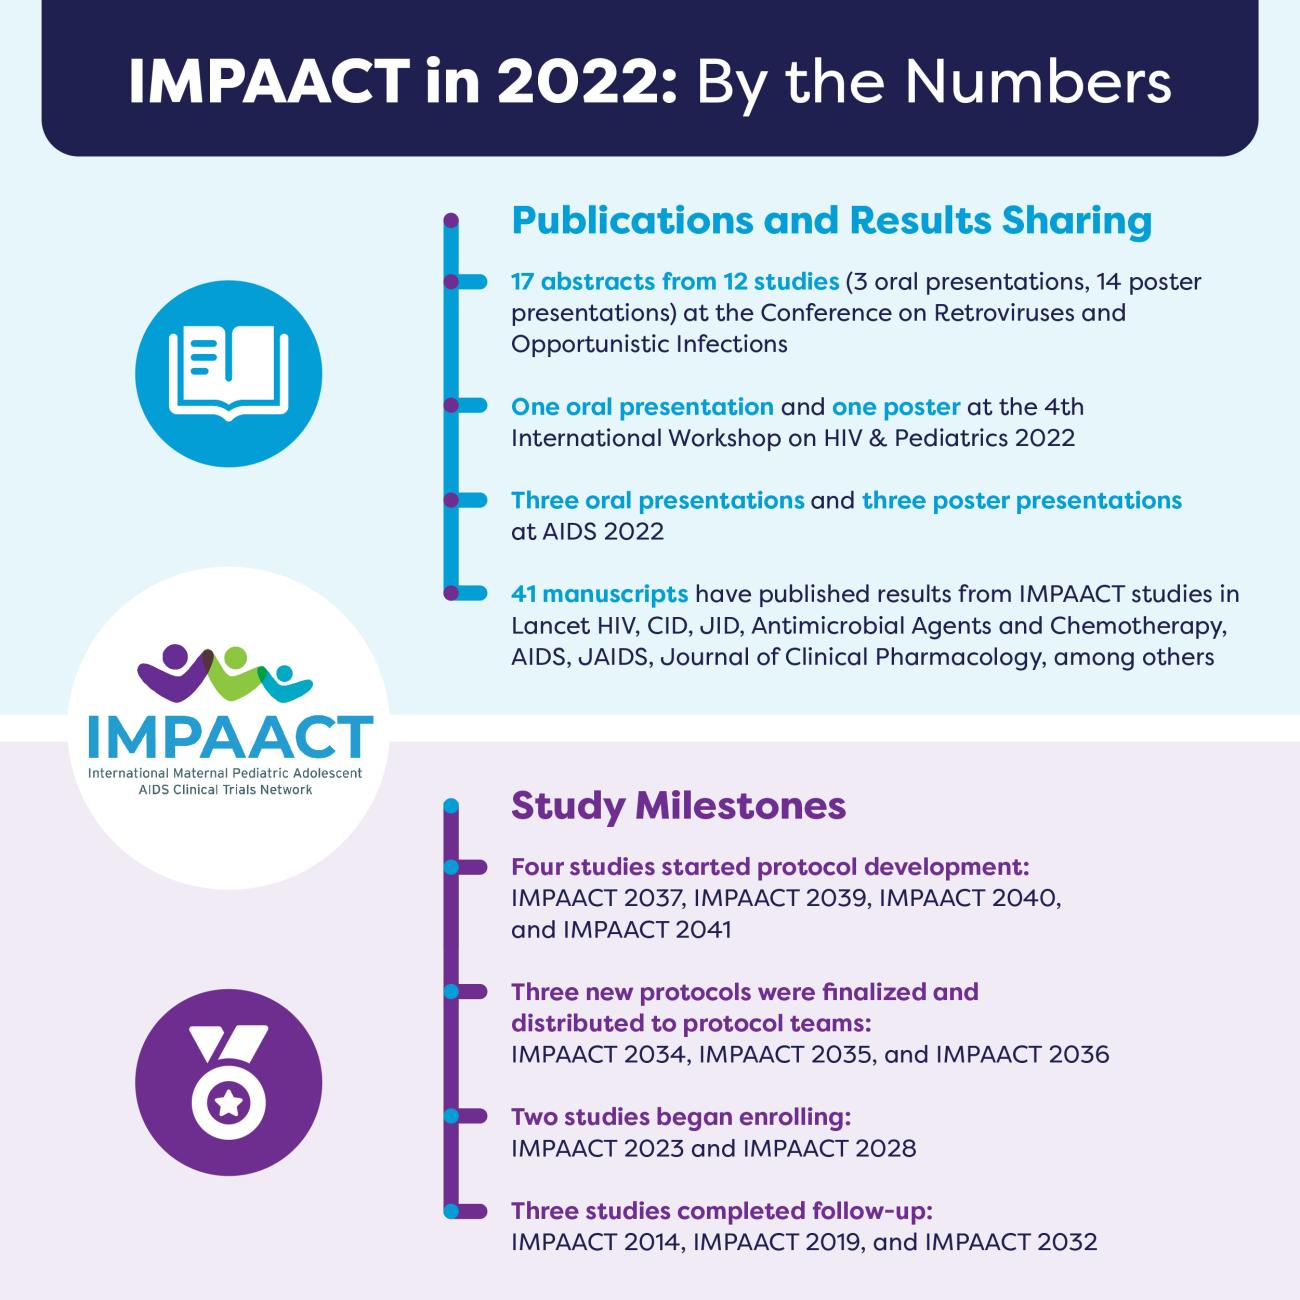 IMPAACT By The Numbers 2022